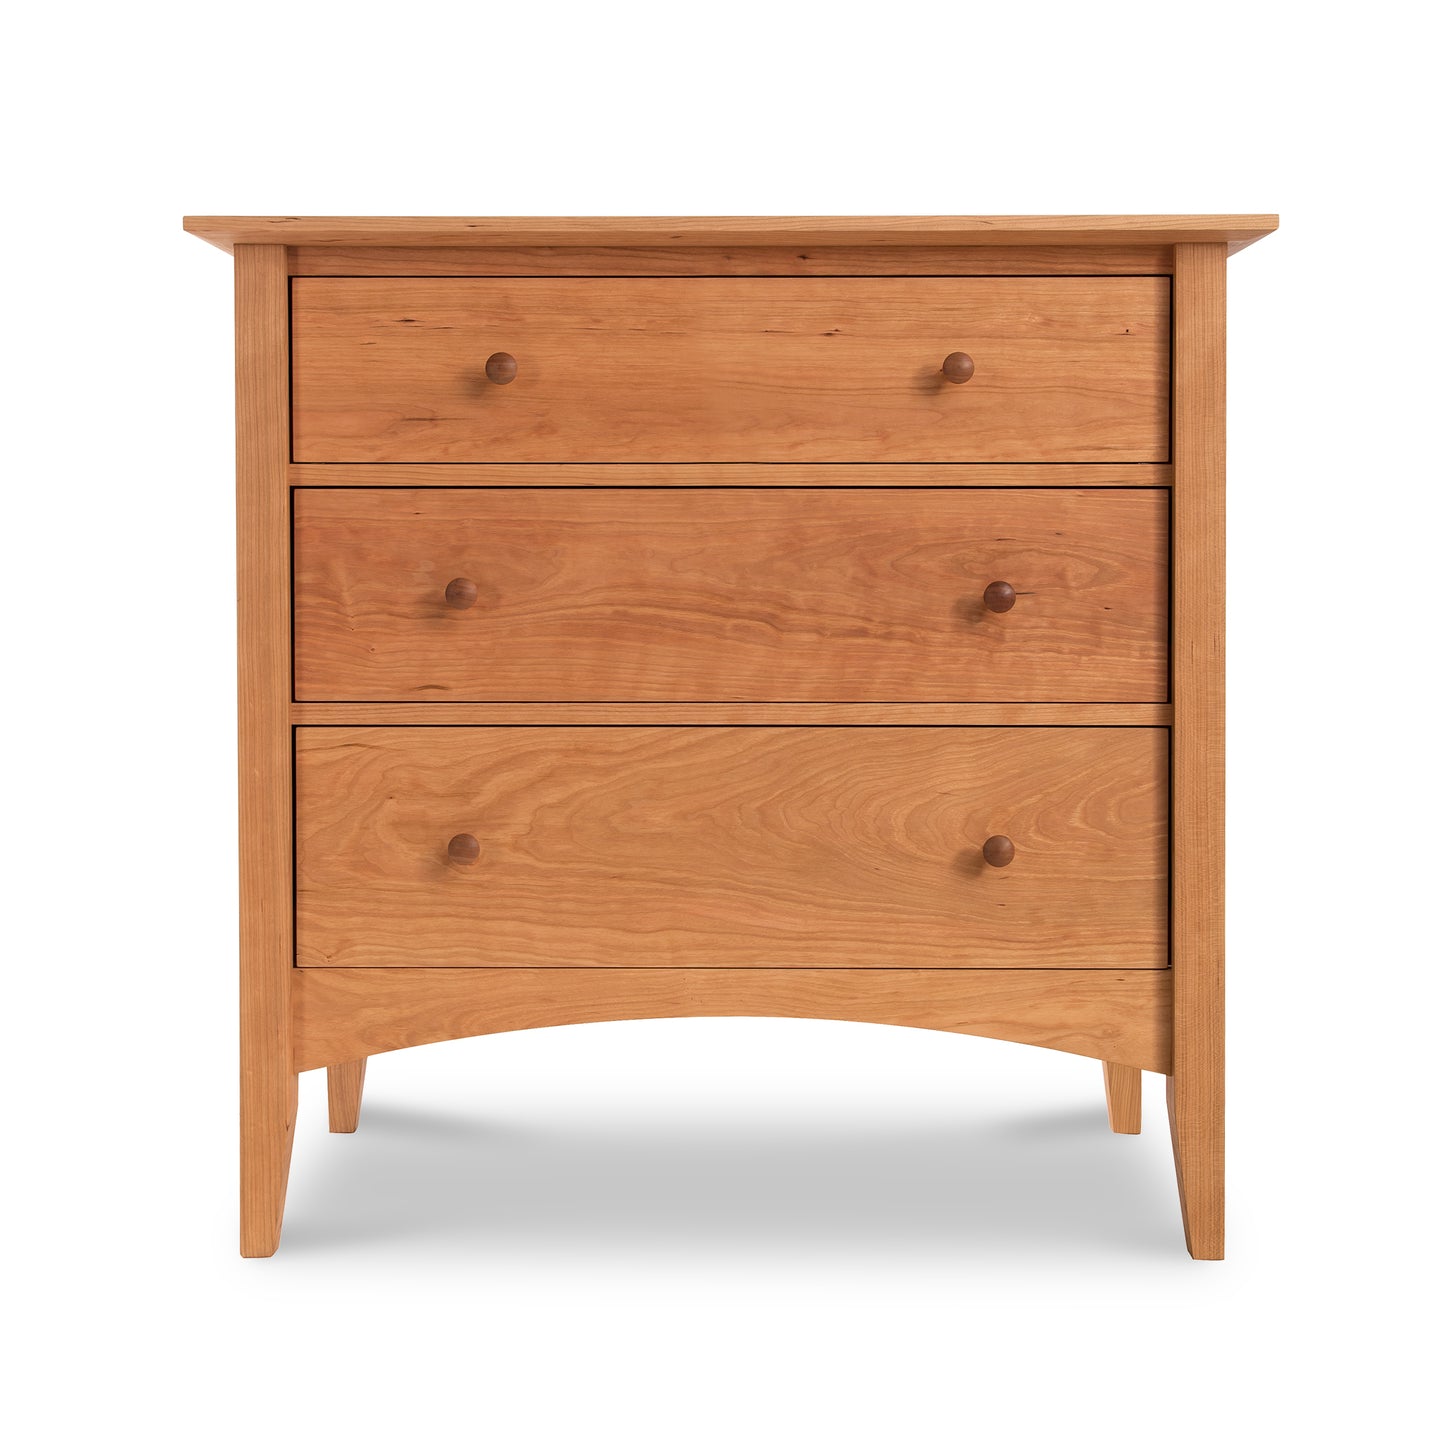 An Maple Corner Woodworks American Shaker 3-drawer chest on a white background, featuring a simple and traditional design with round knobs and slightly curved legs.